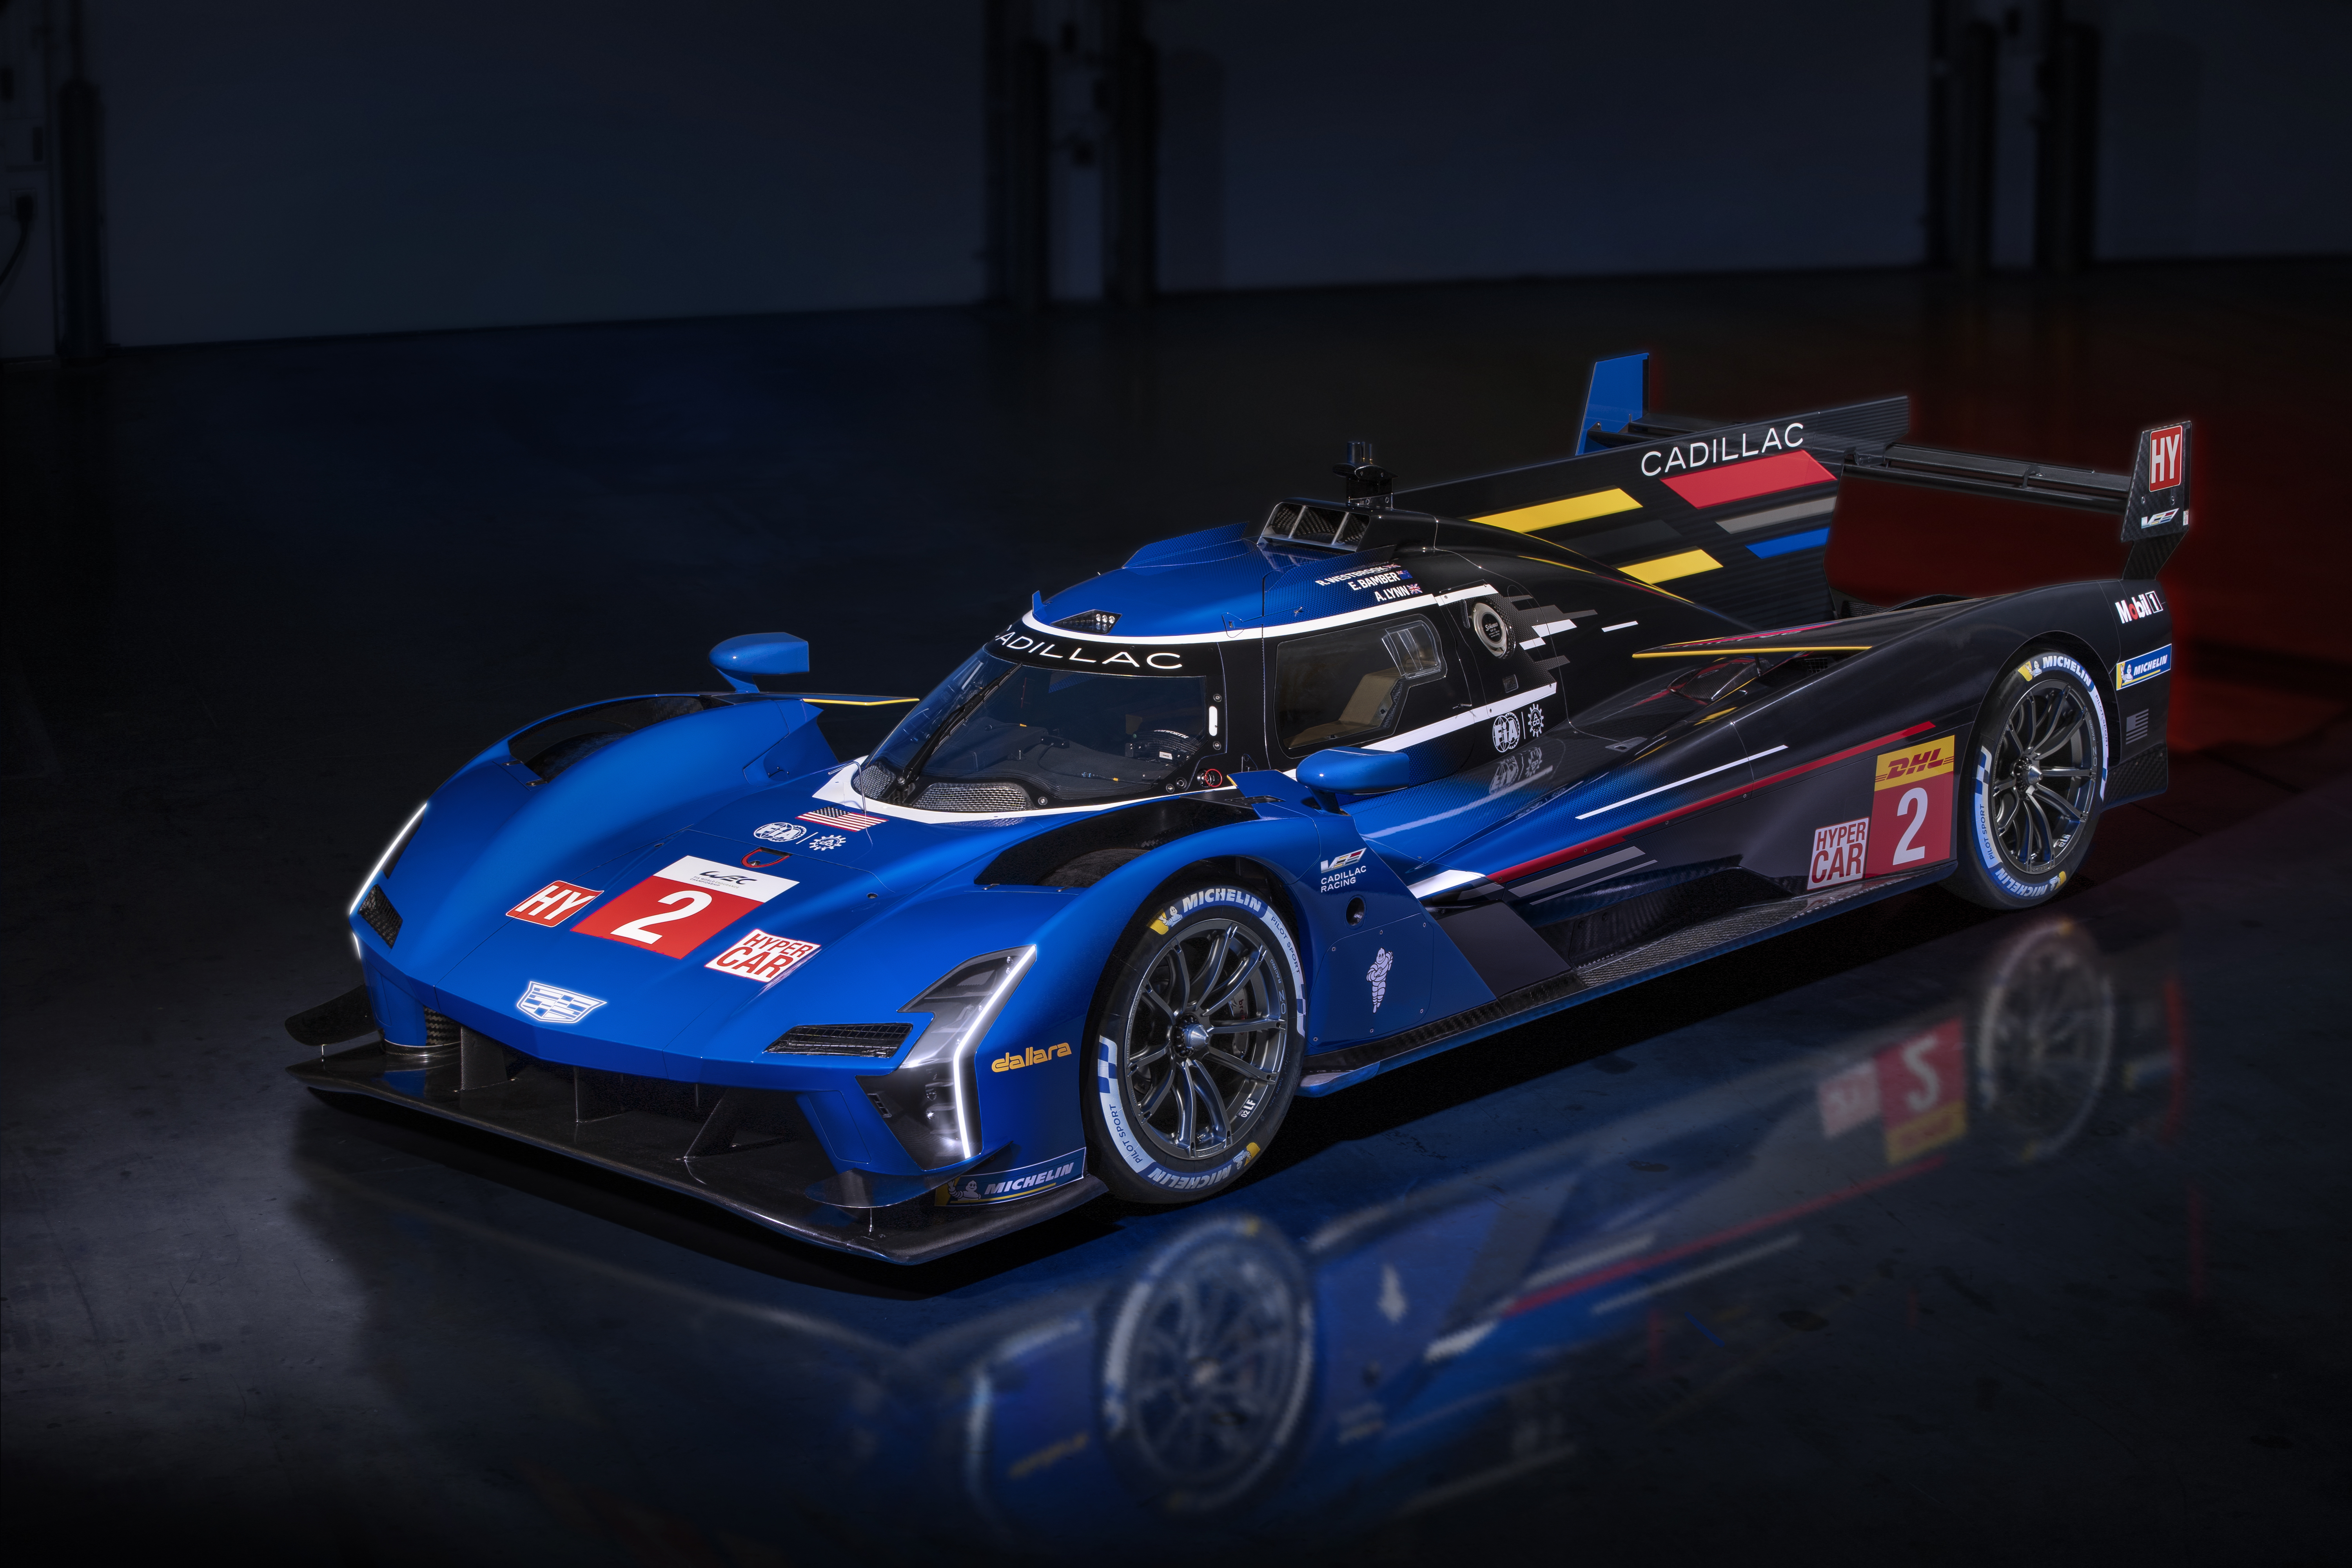 unveils livery of new in class - FIA